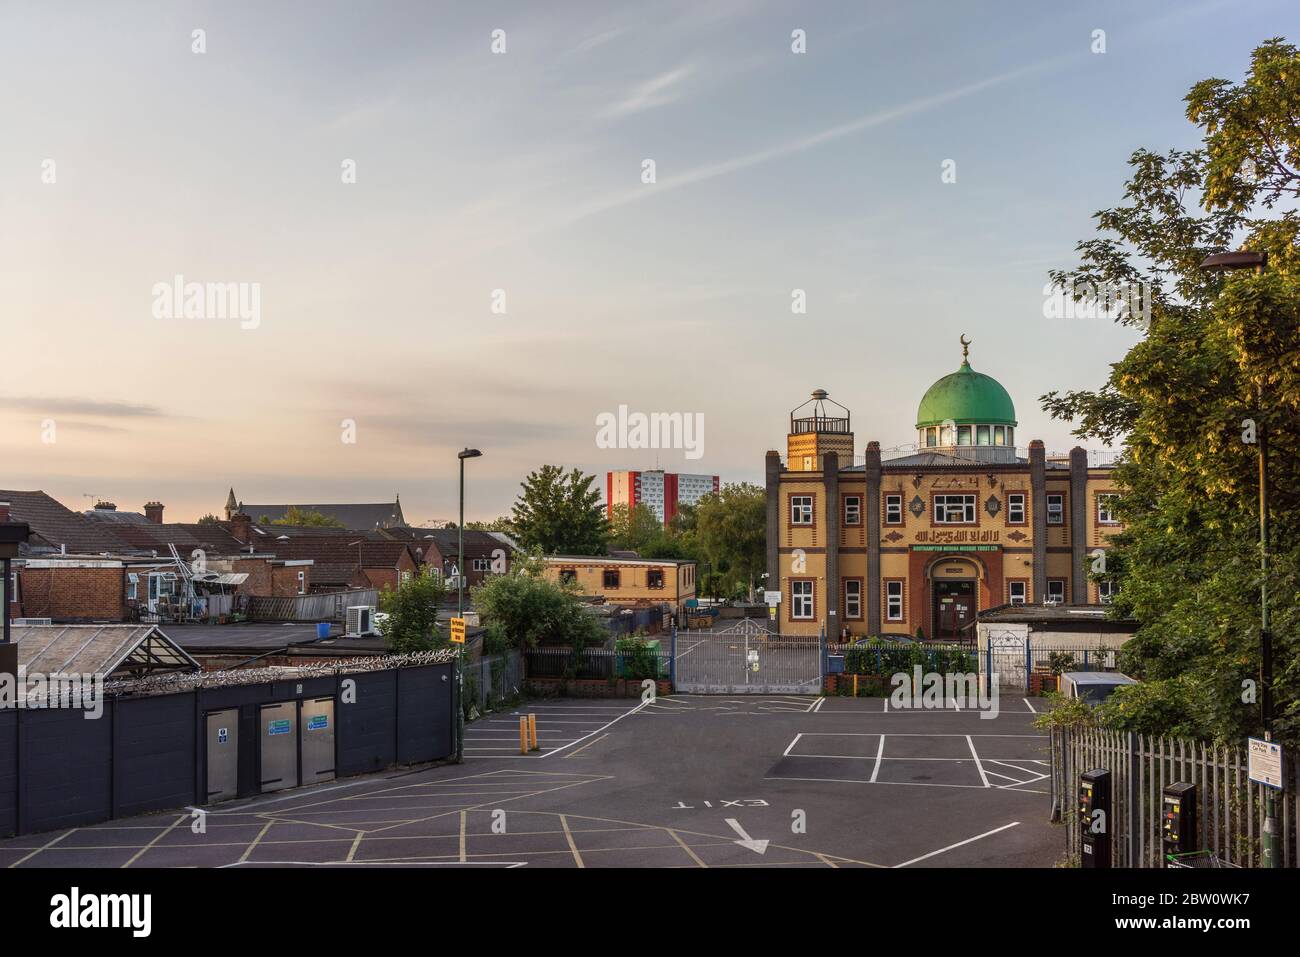 View across St Marys in Southampton with the green dome of the Medina Mosque to the right during the morning May 2020, Southampton, England Stock Photo